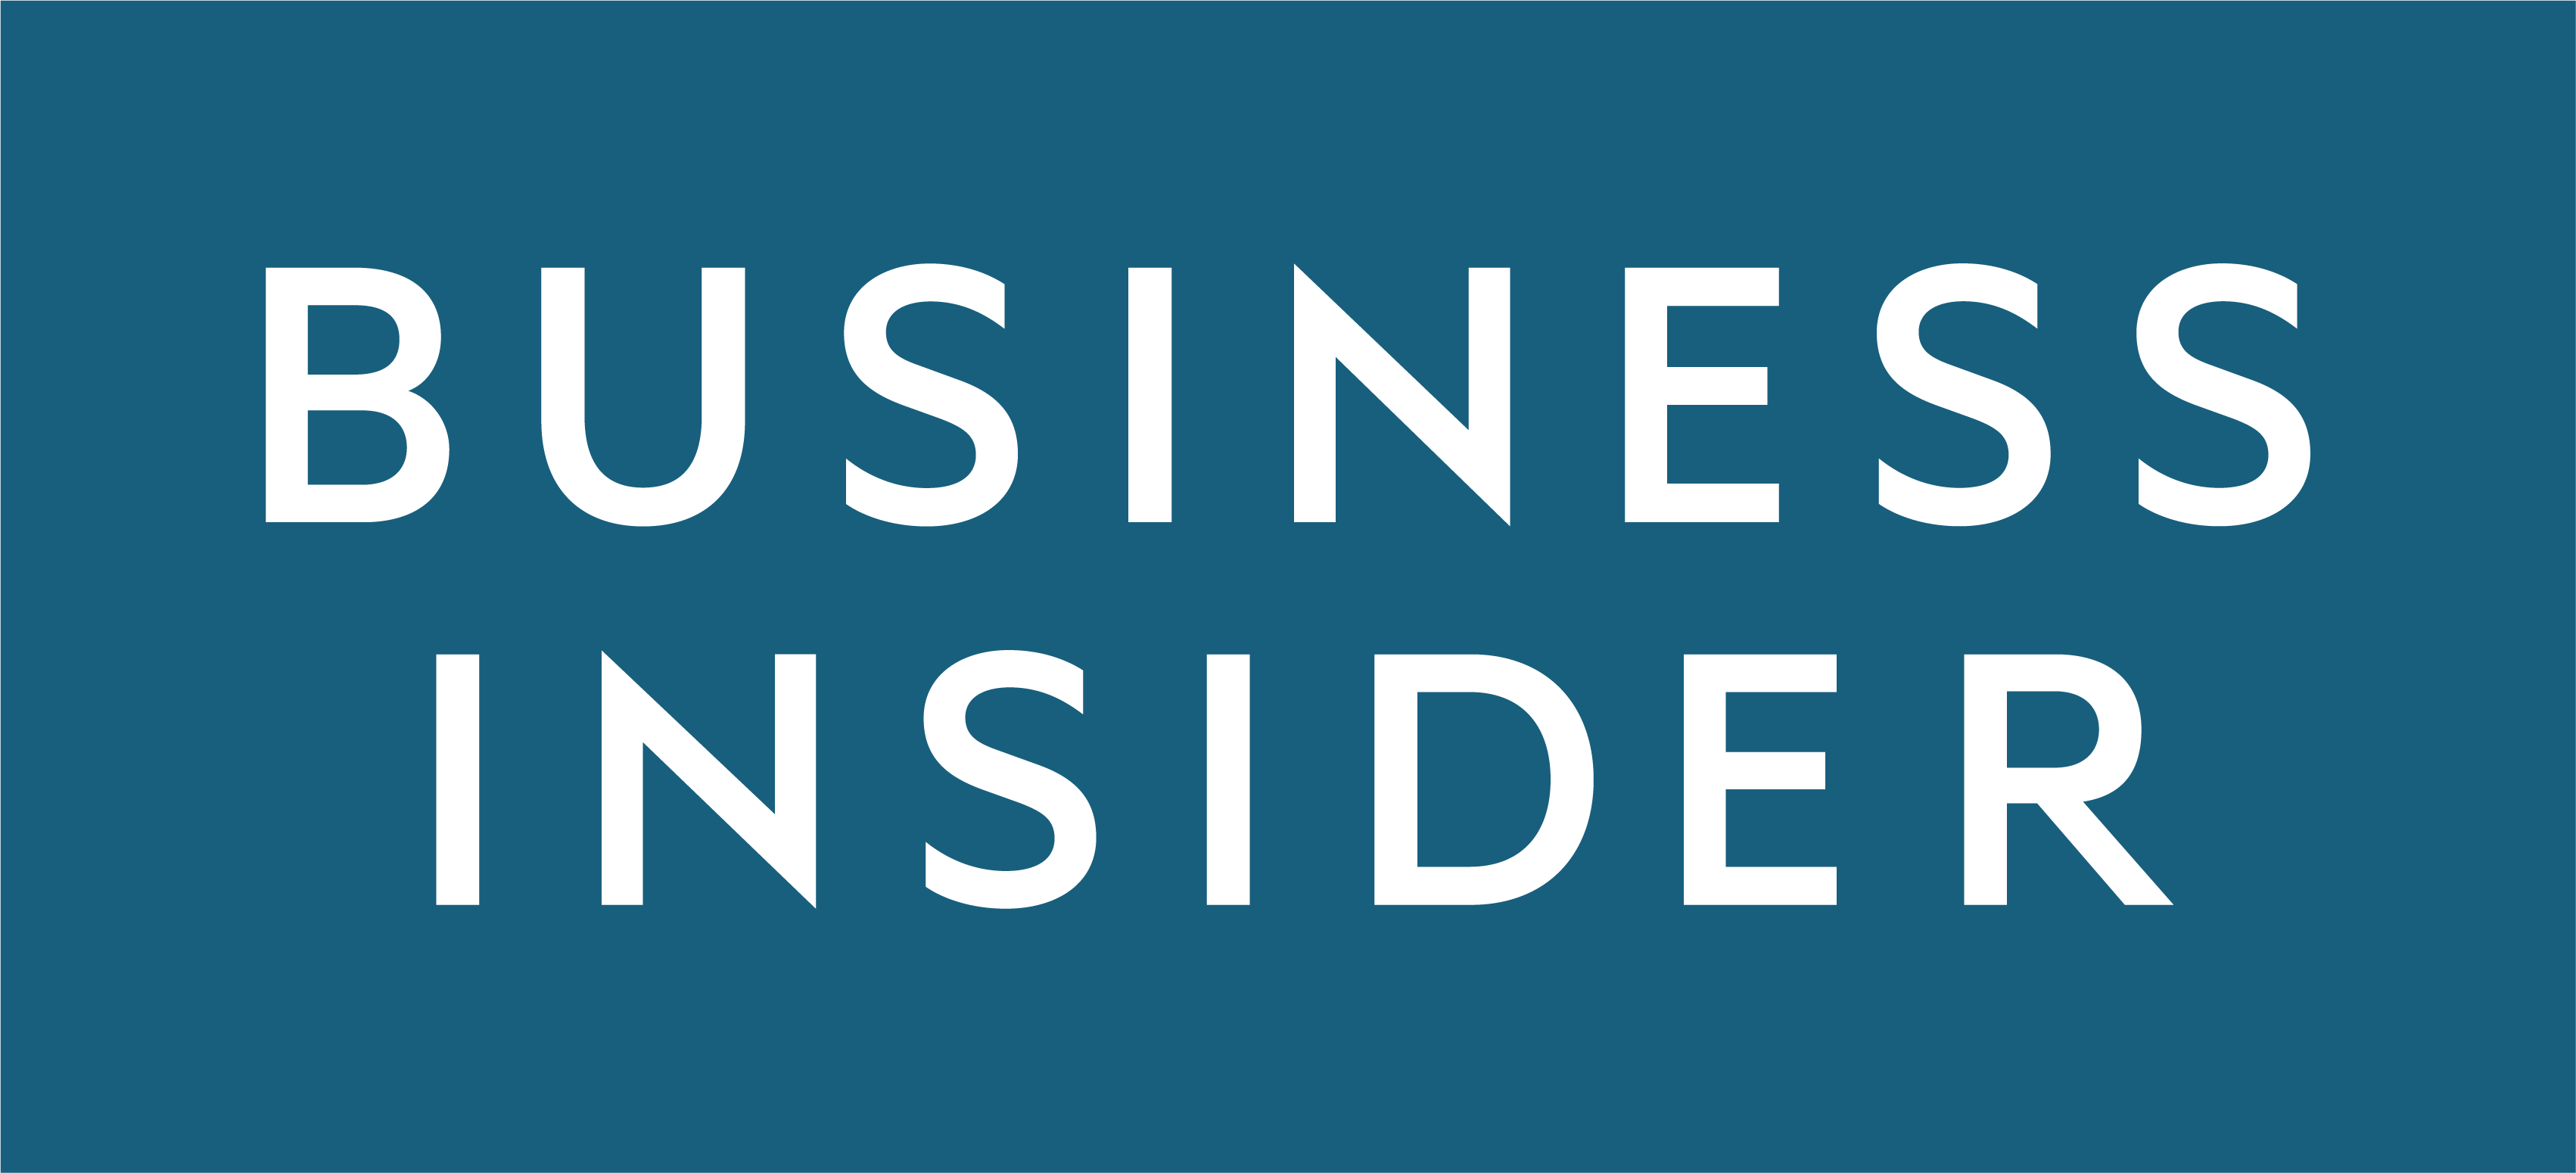 Business Insider logo in reference to an article on businessinsider.com that mentions/links to 1st Move International